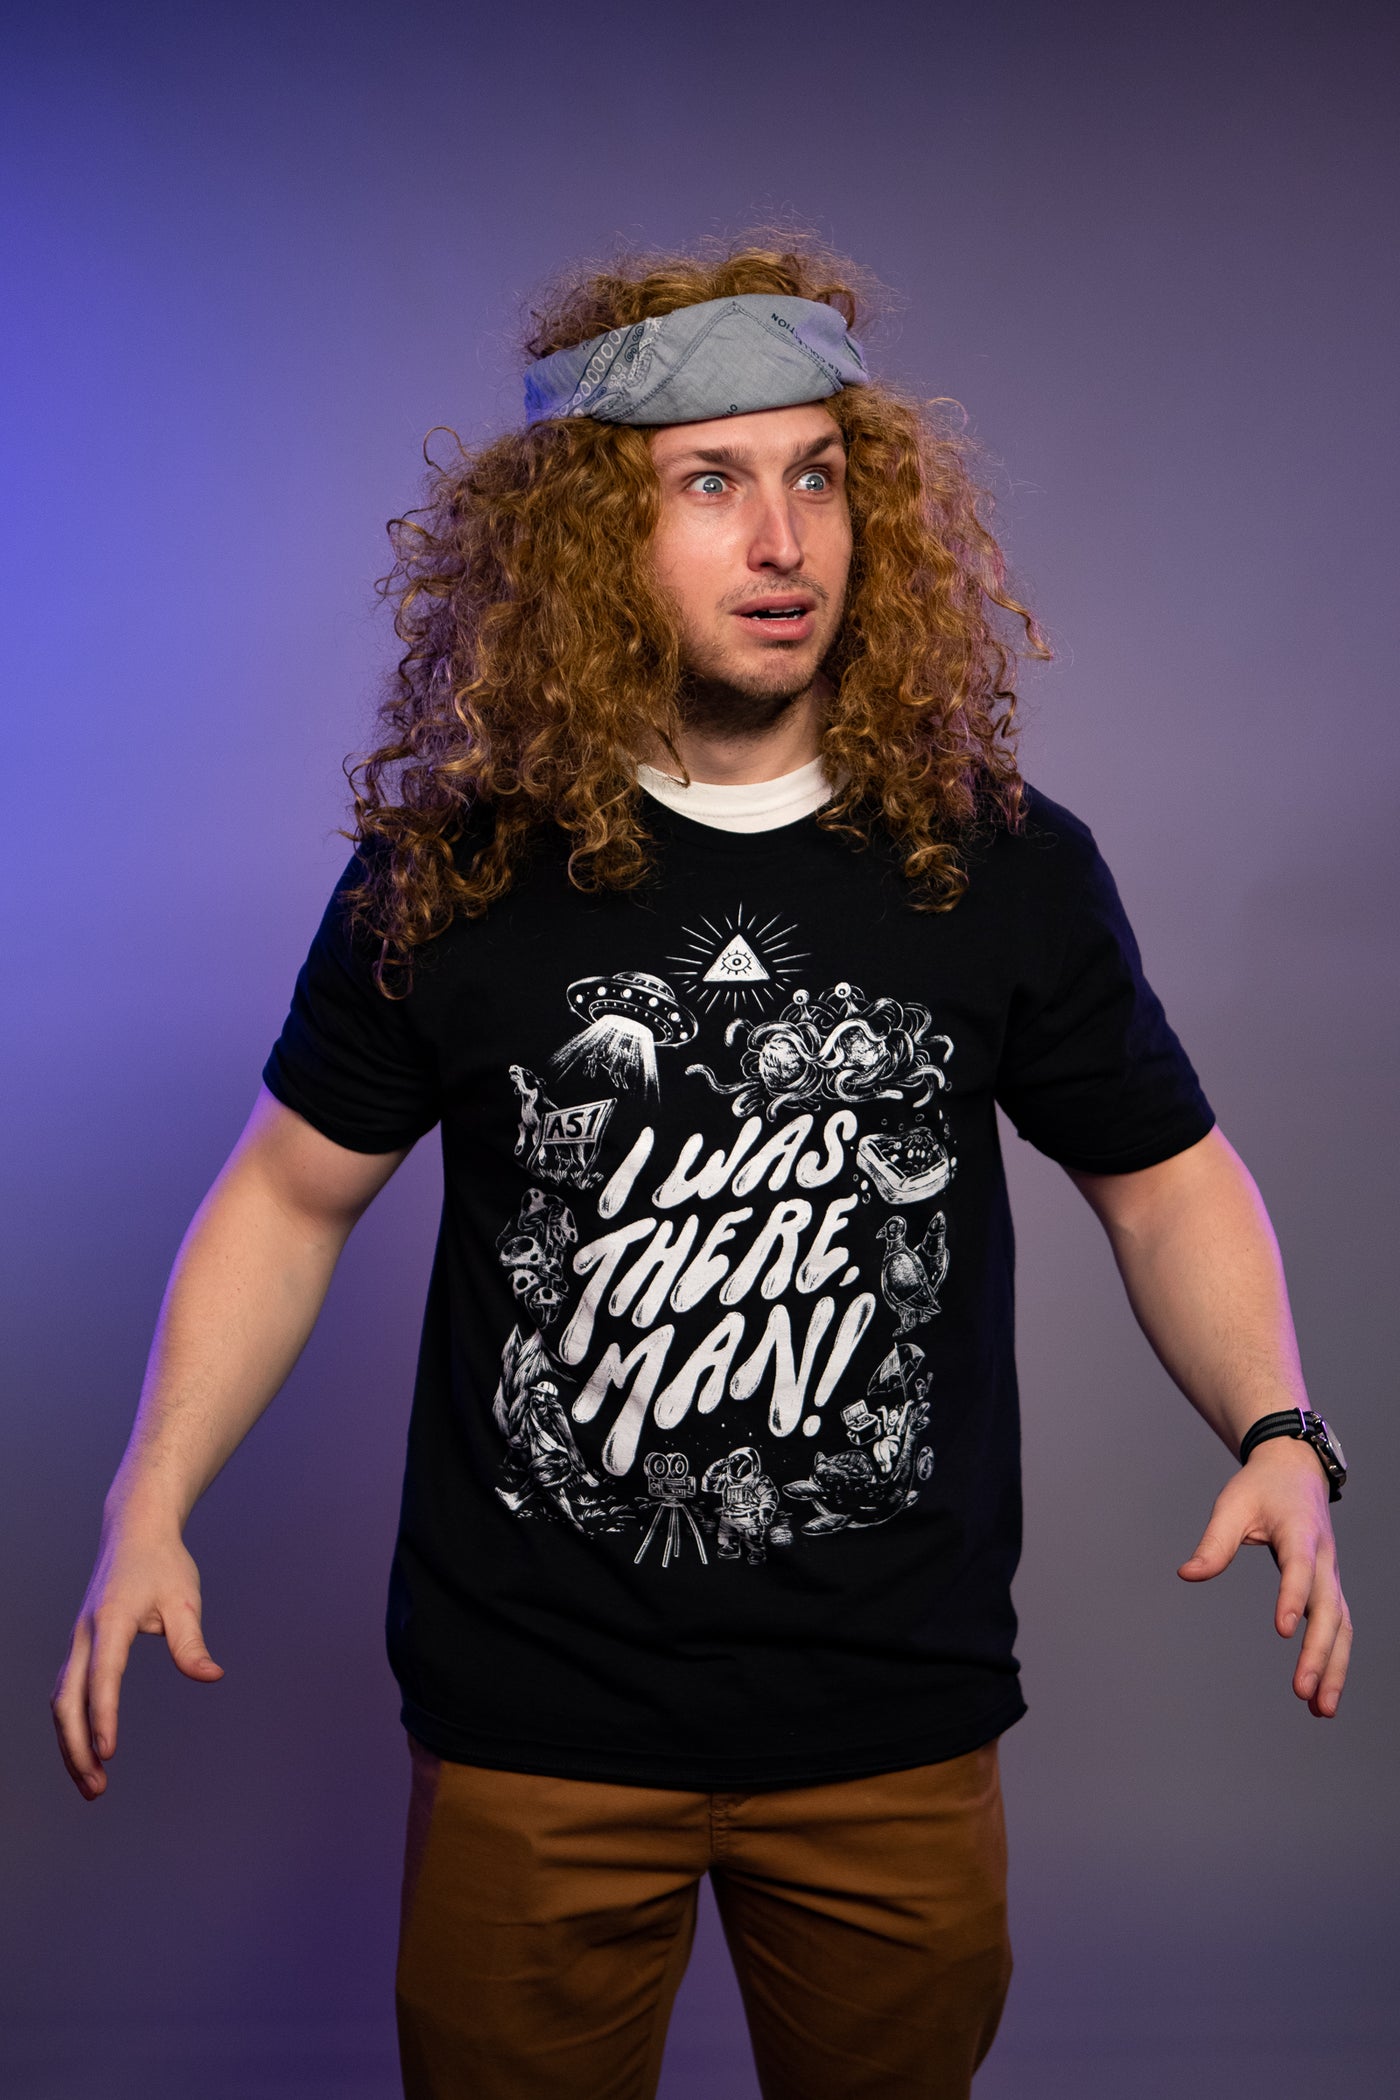 I Was There Man Tee - Heather Black